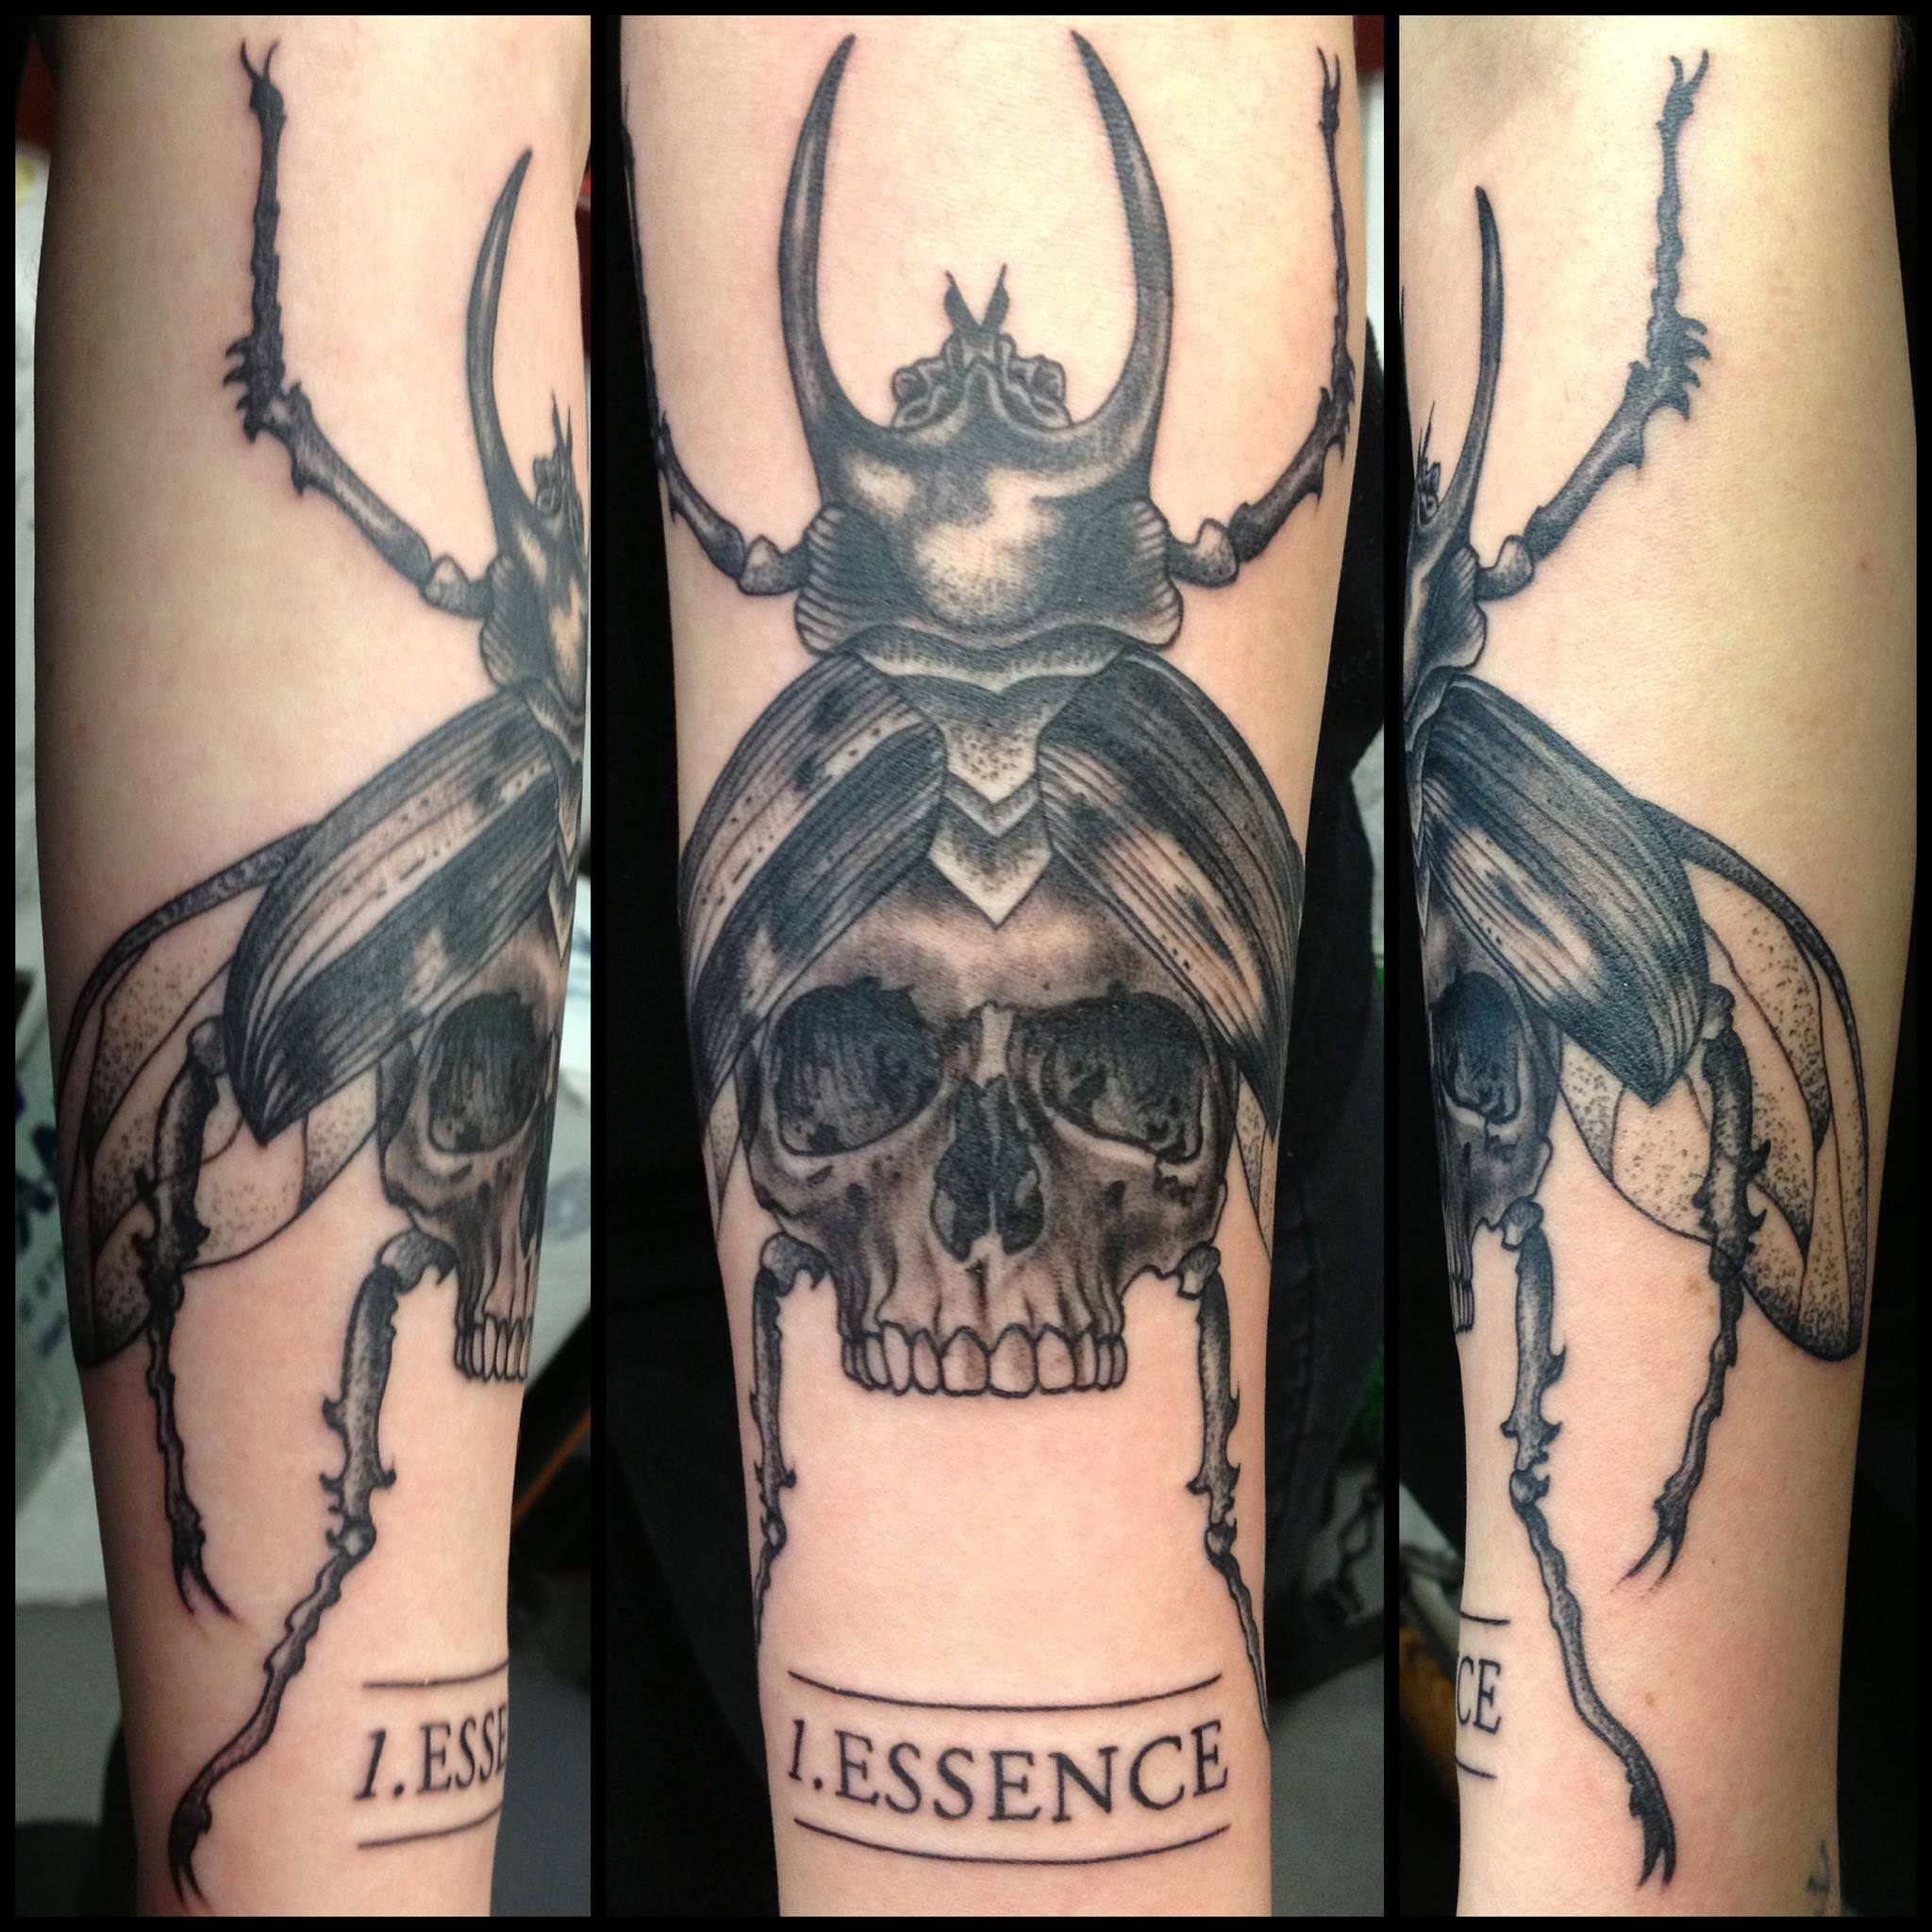 Black Ink Skull Beetle Tattoo Design For Forearm By Maud